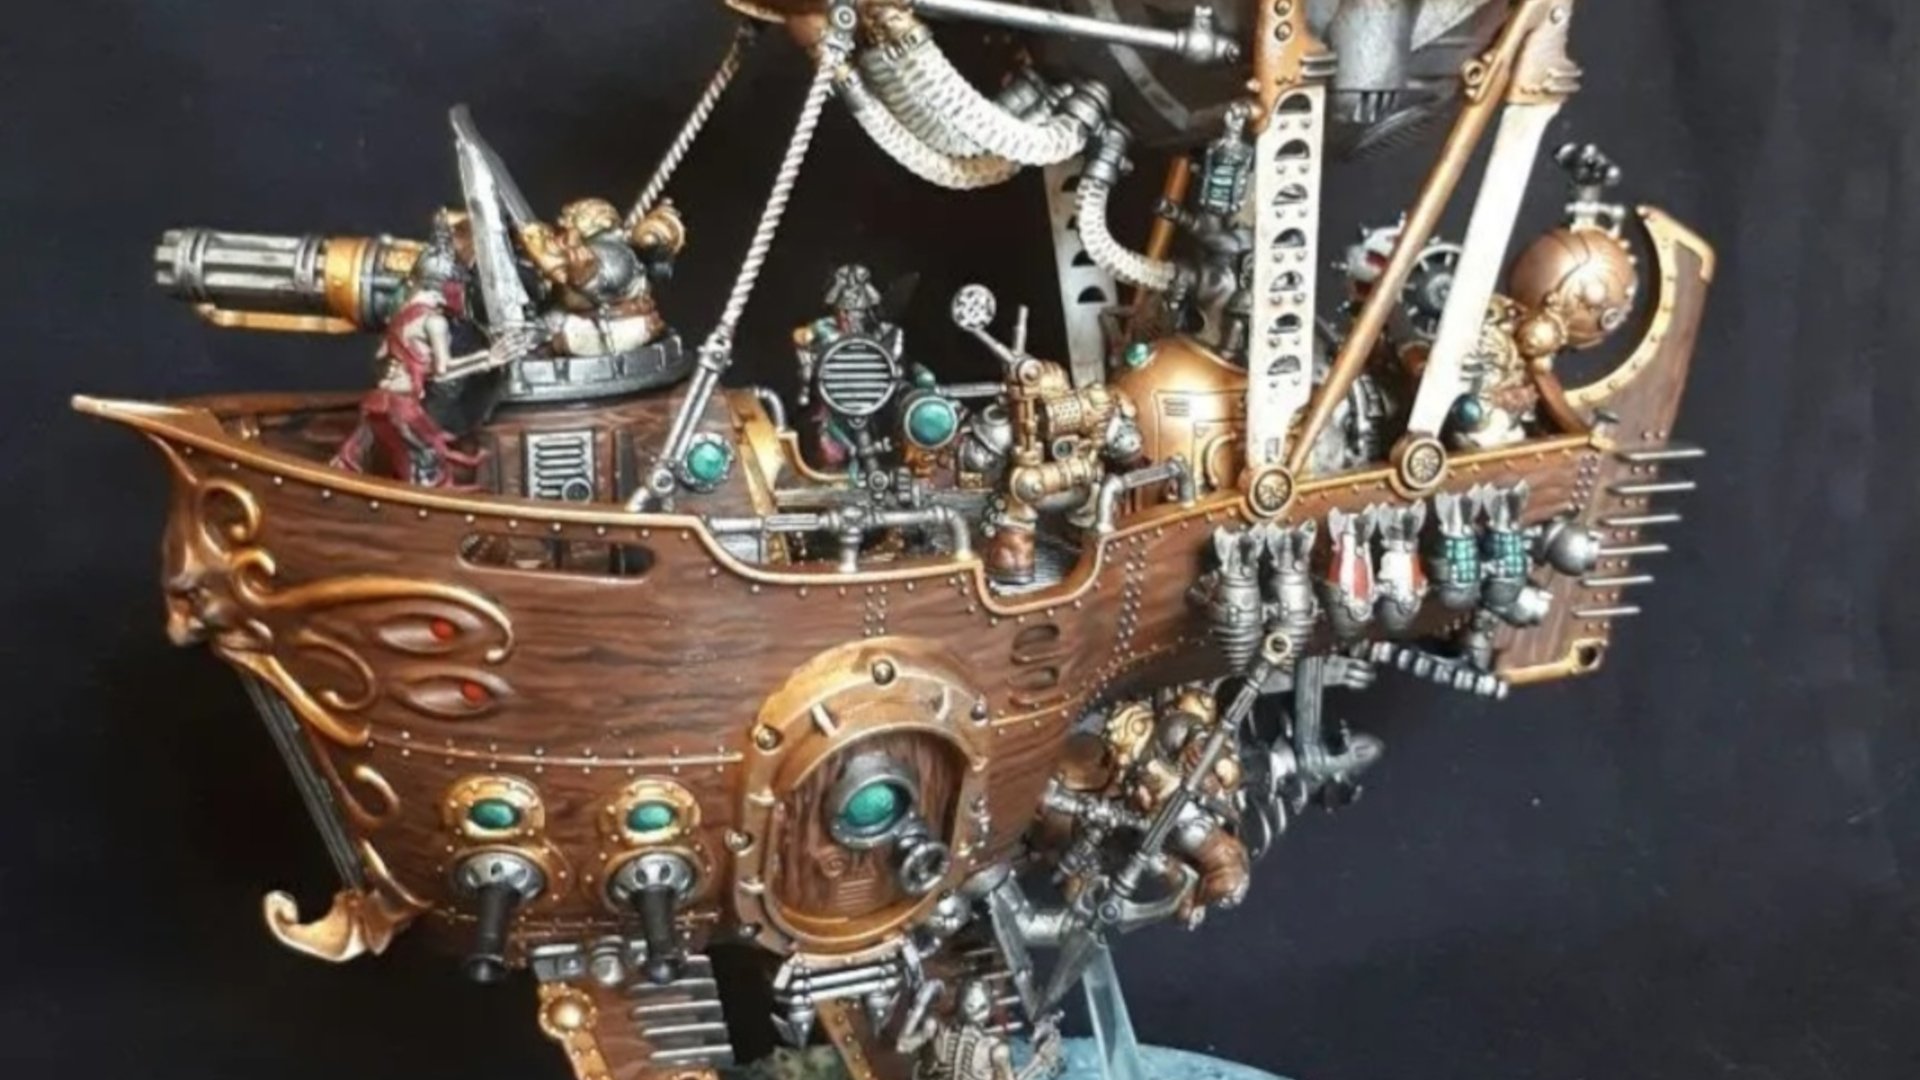 Warhammer Age of Sigmar Kharadron Overlords - Arkanaut Ironclad (image by HelterSkelter)